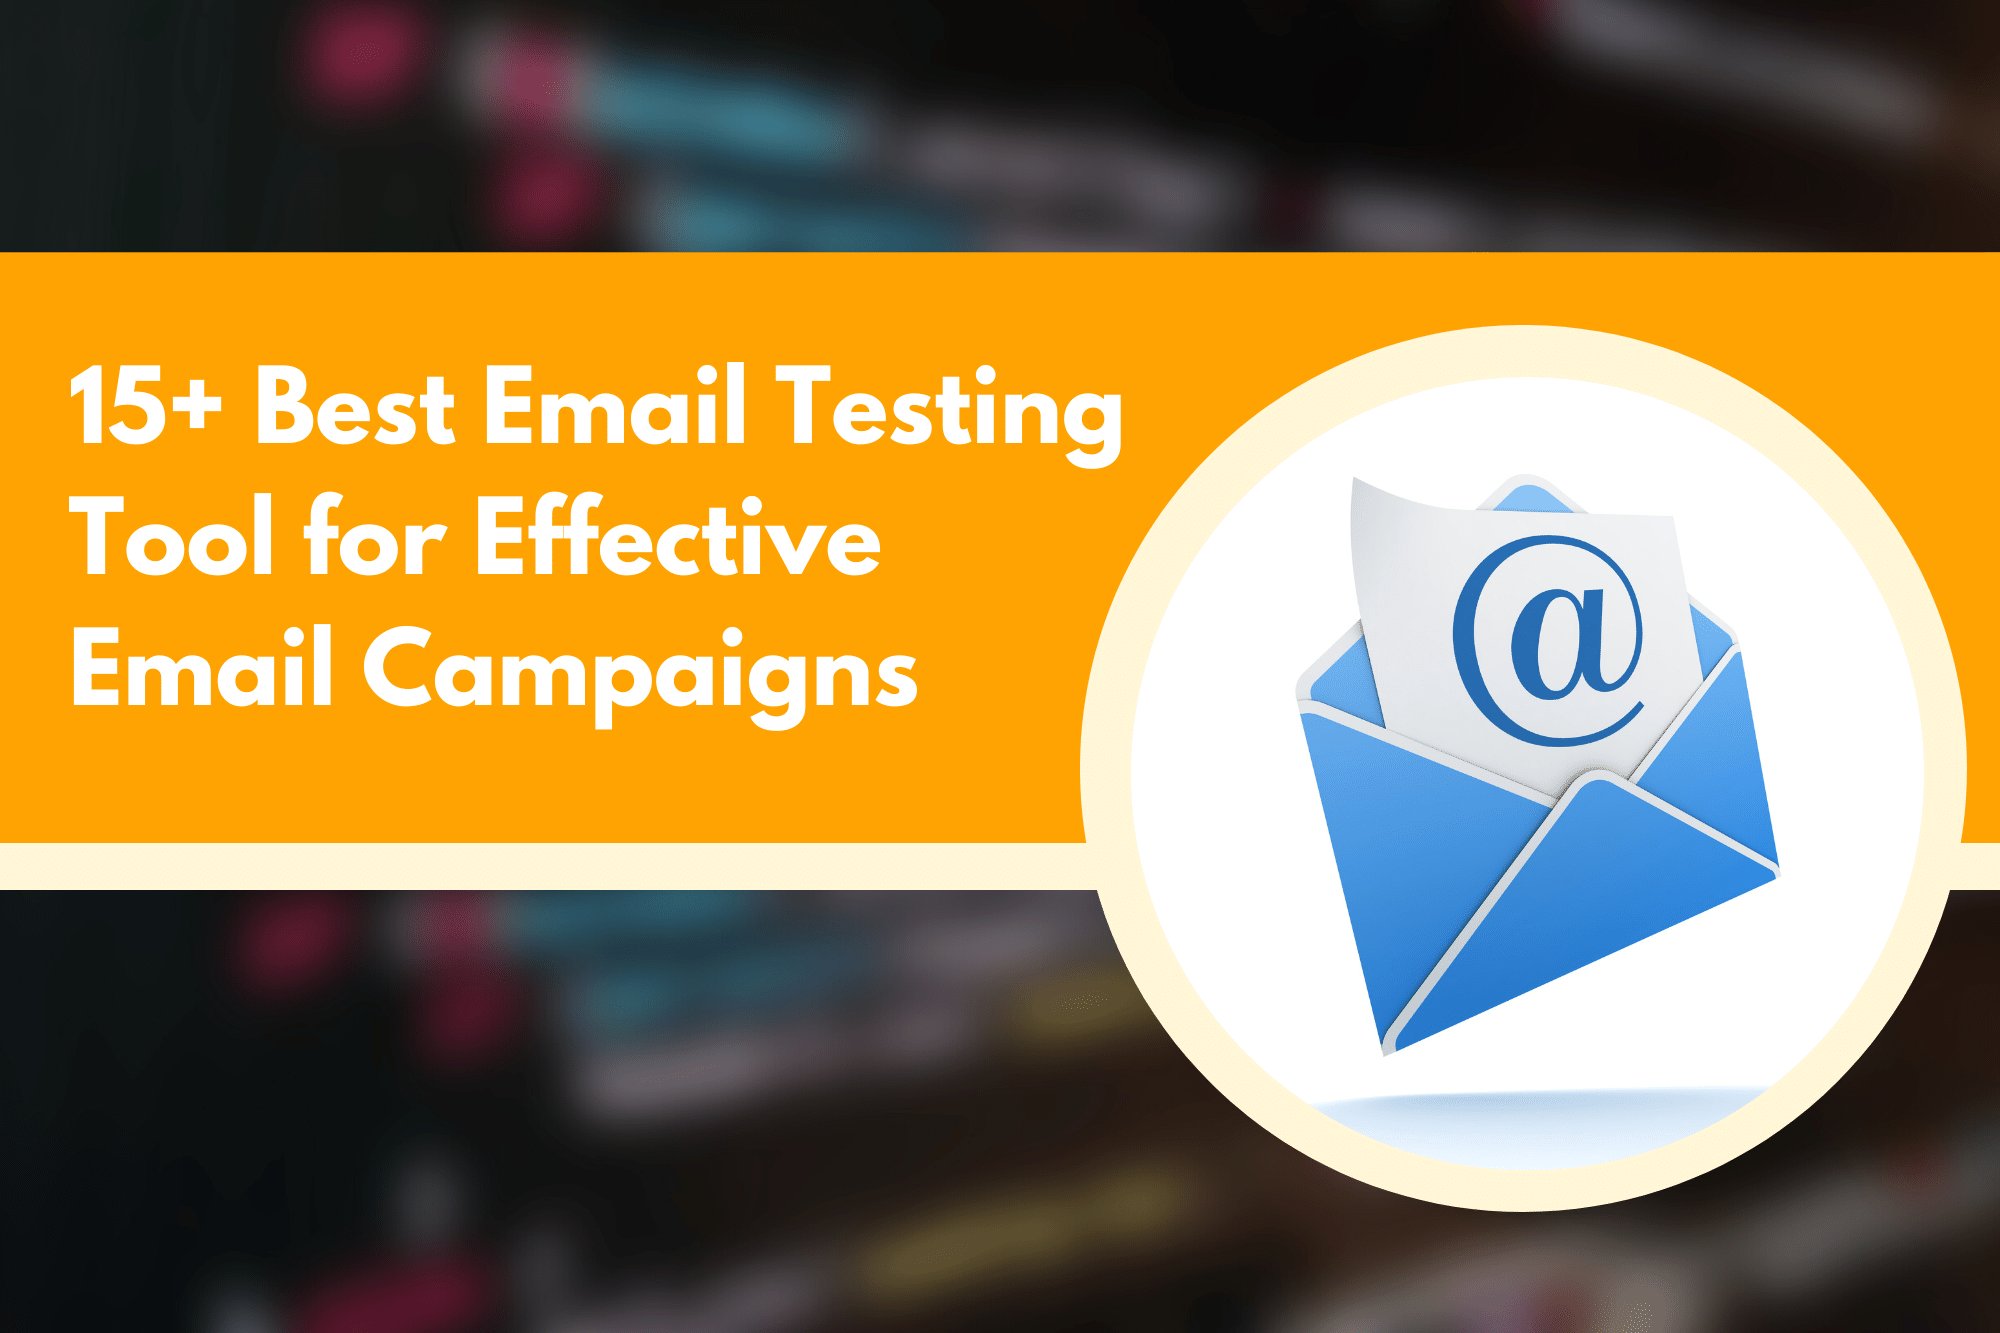 15+ Best Email Testing Tool for Effective Email Campaigns